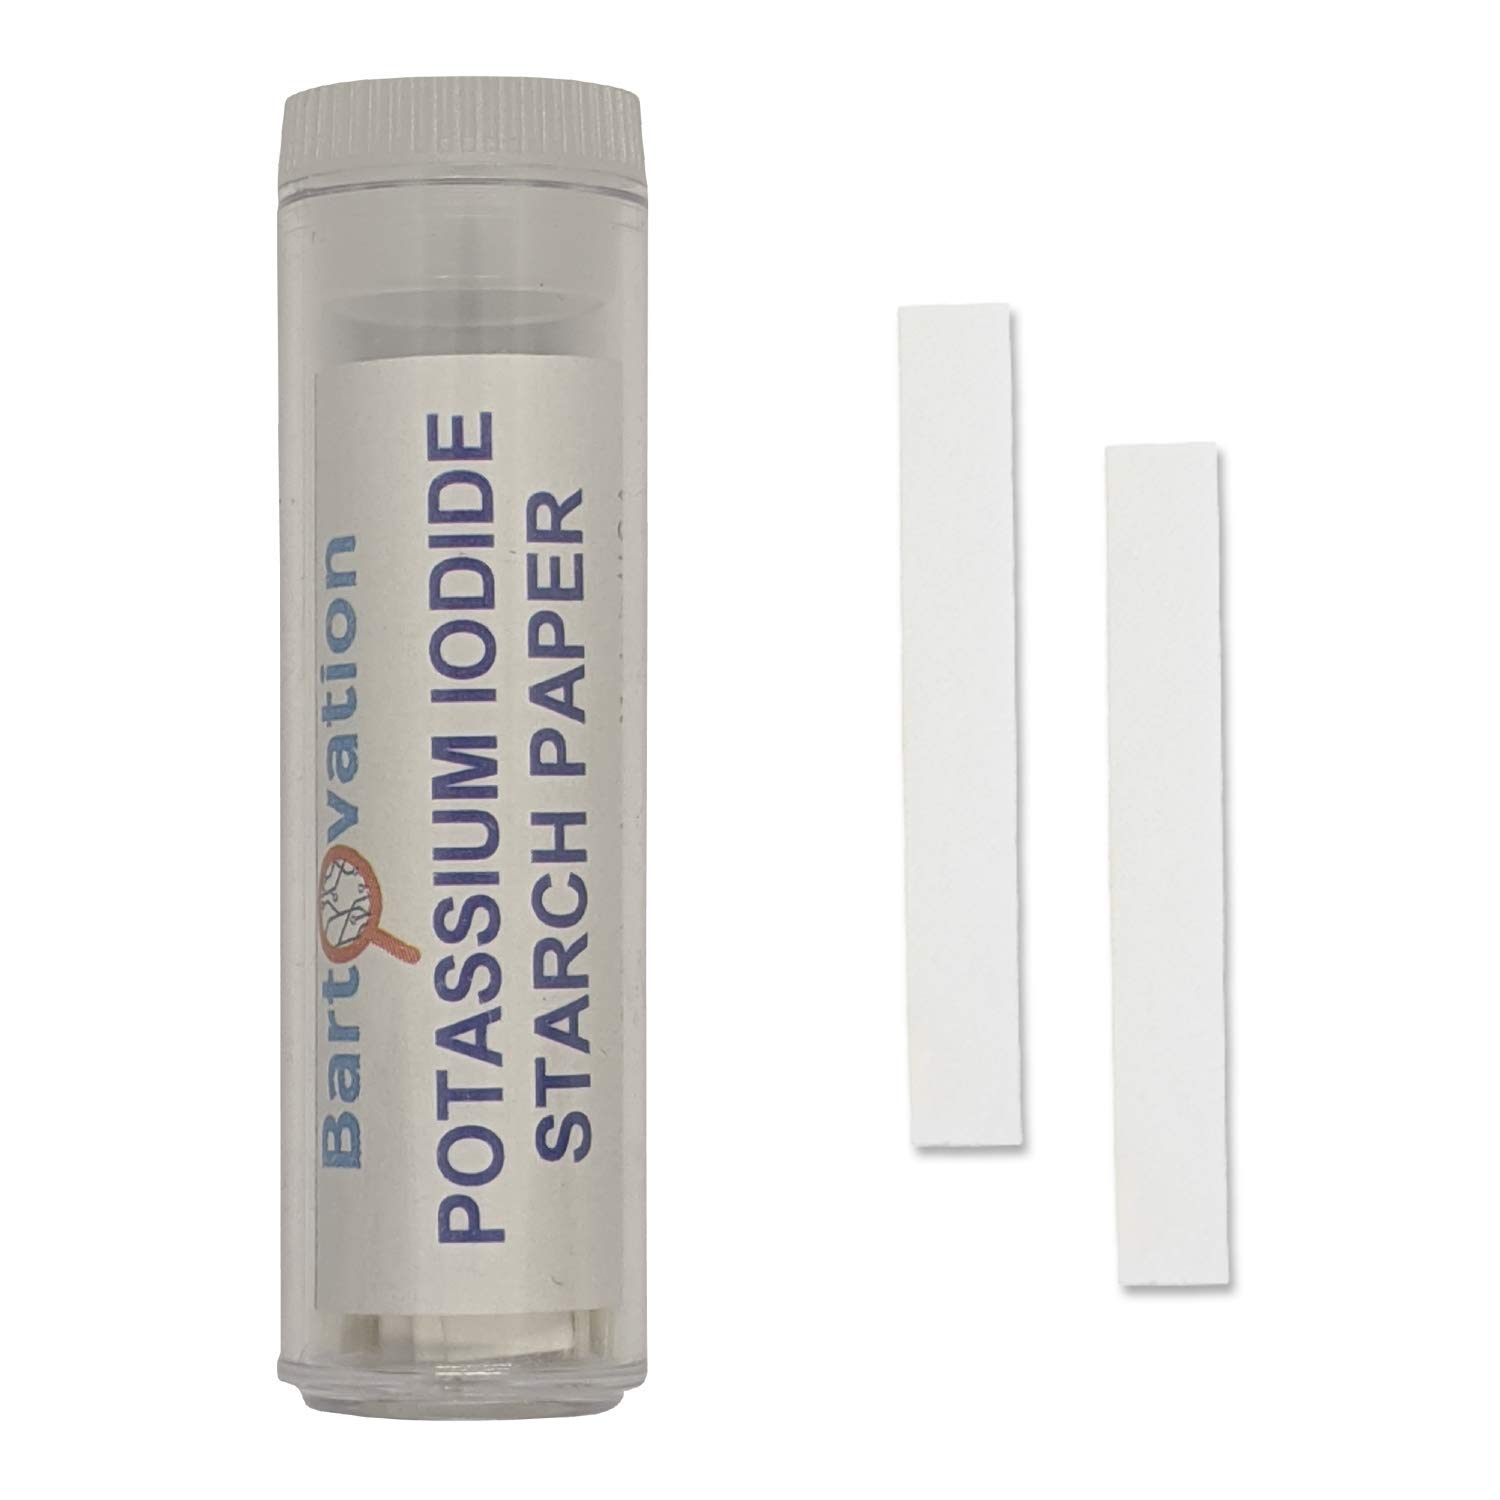 Potassium Iodide Starch Oxidizer Test Paper [Vial of 100 Paper Test Strips] for Chlorine, Iodine and Peroxide Detection